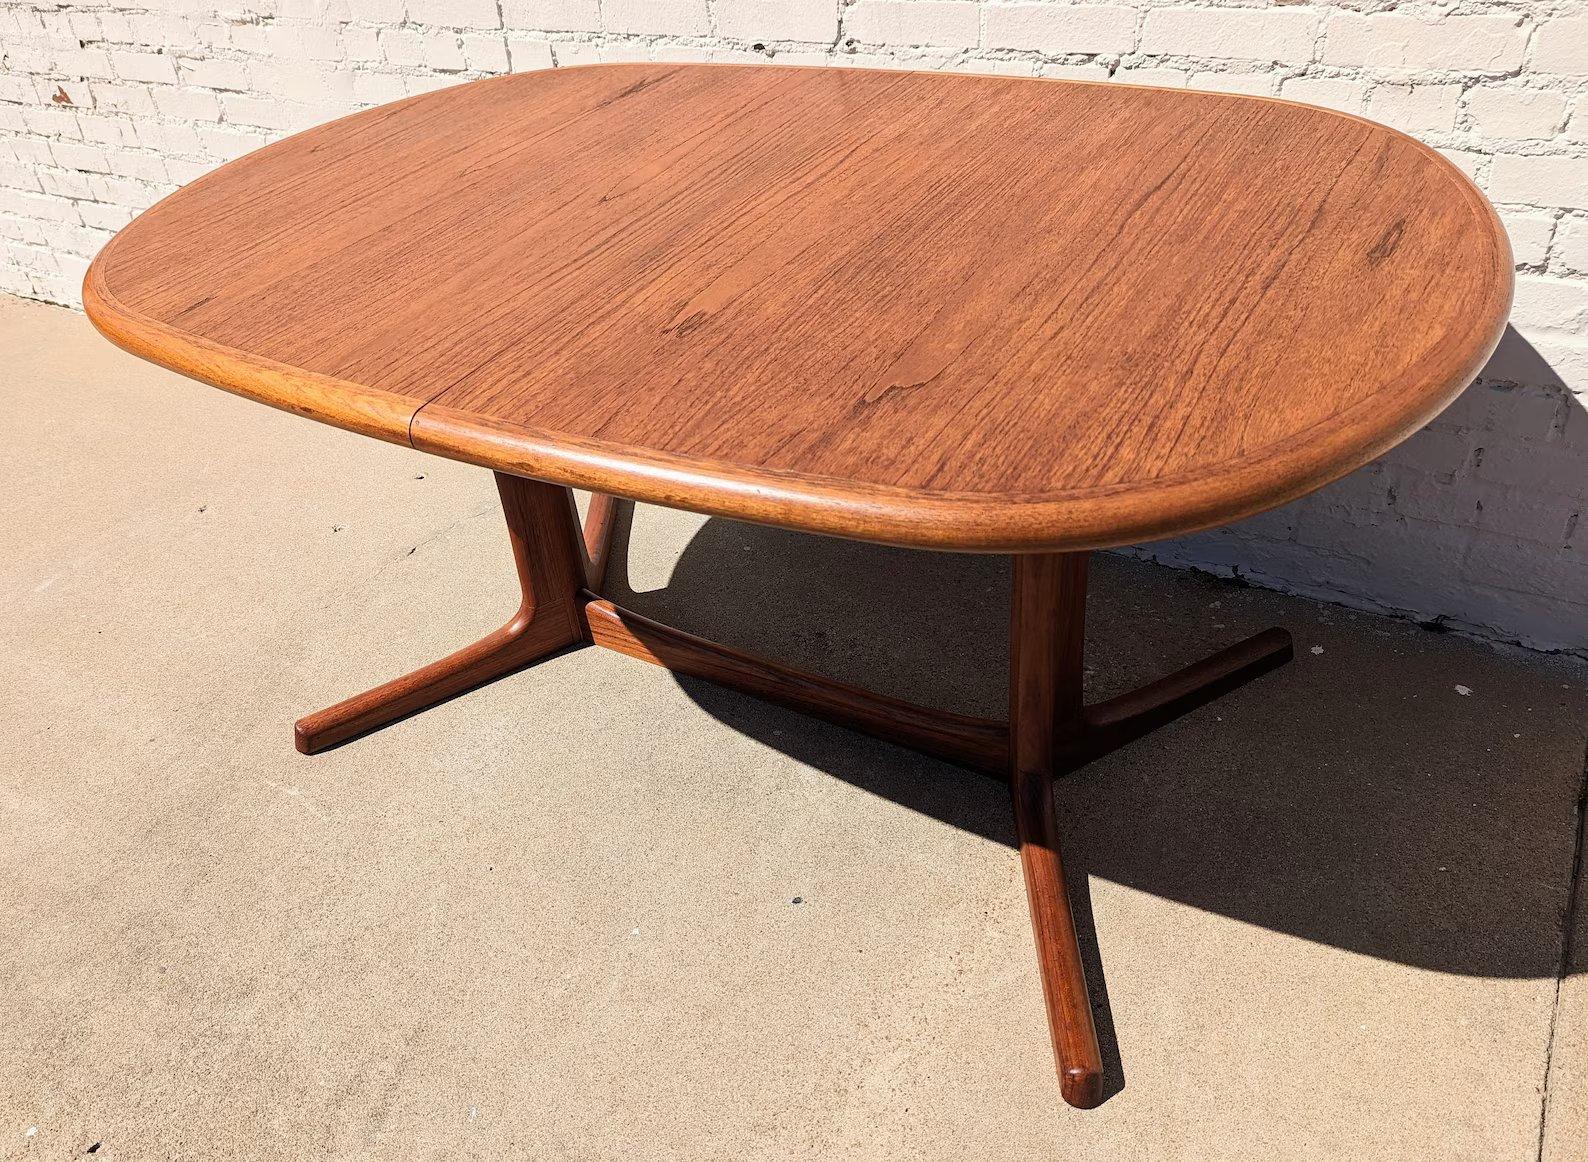 Mid Century Danish Modern Teak Dining Table by Gudme Mbfbk
 
Has 2 leaves which are 17